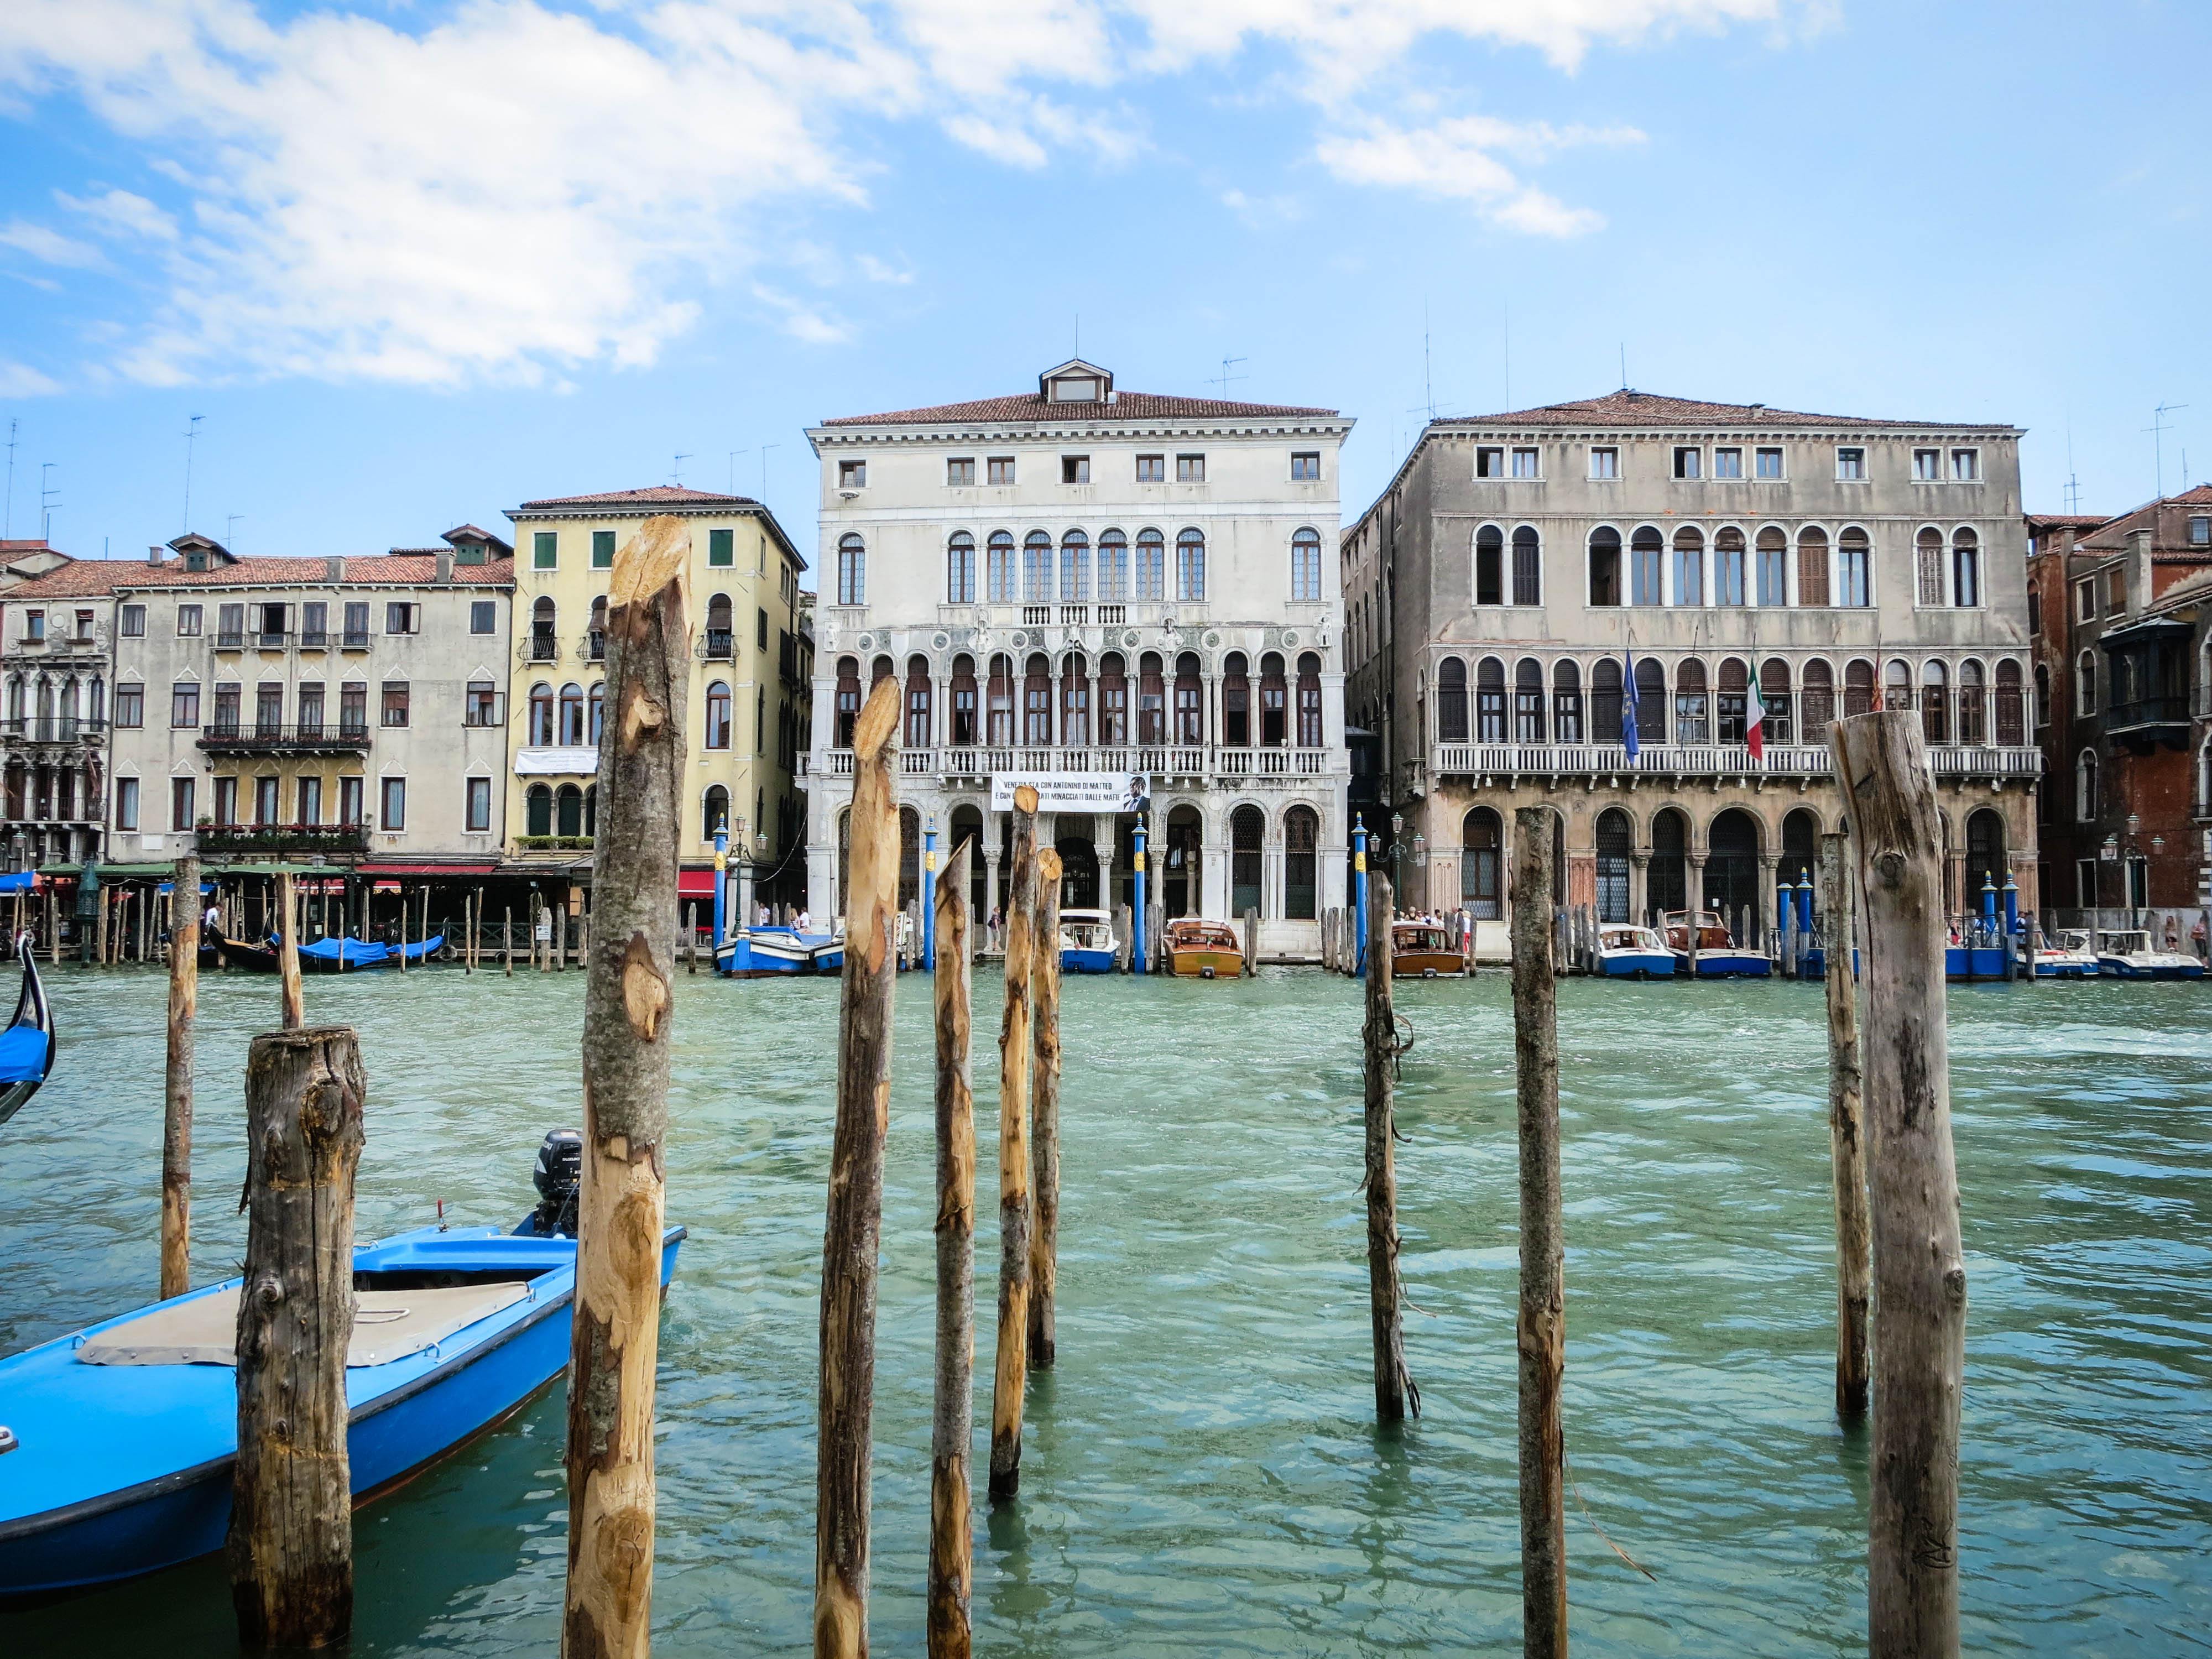 Venice. 6 accommodations that are good for families wanting to travel to Venice with kids.